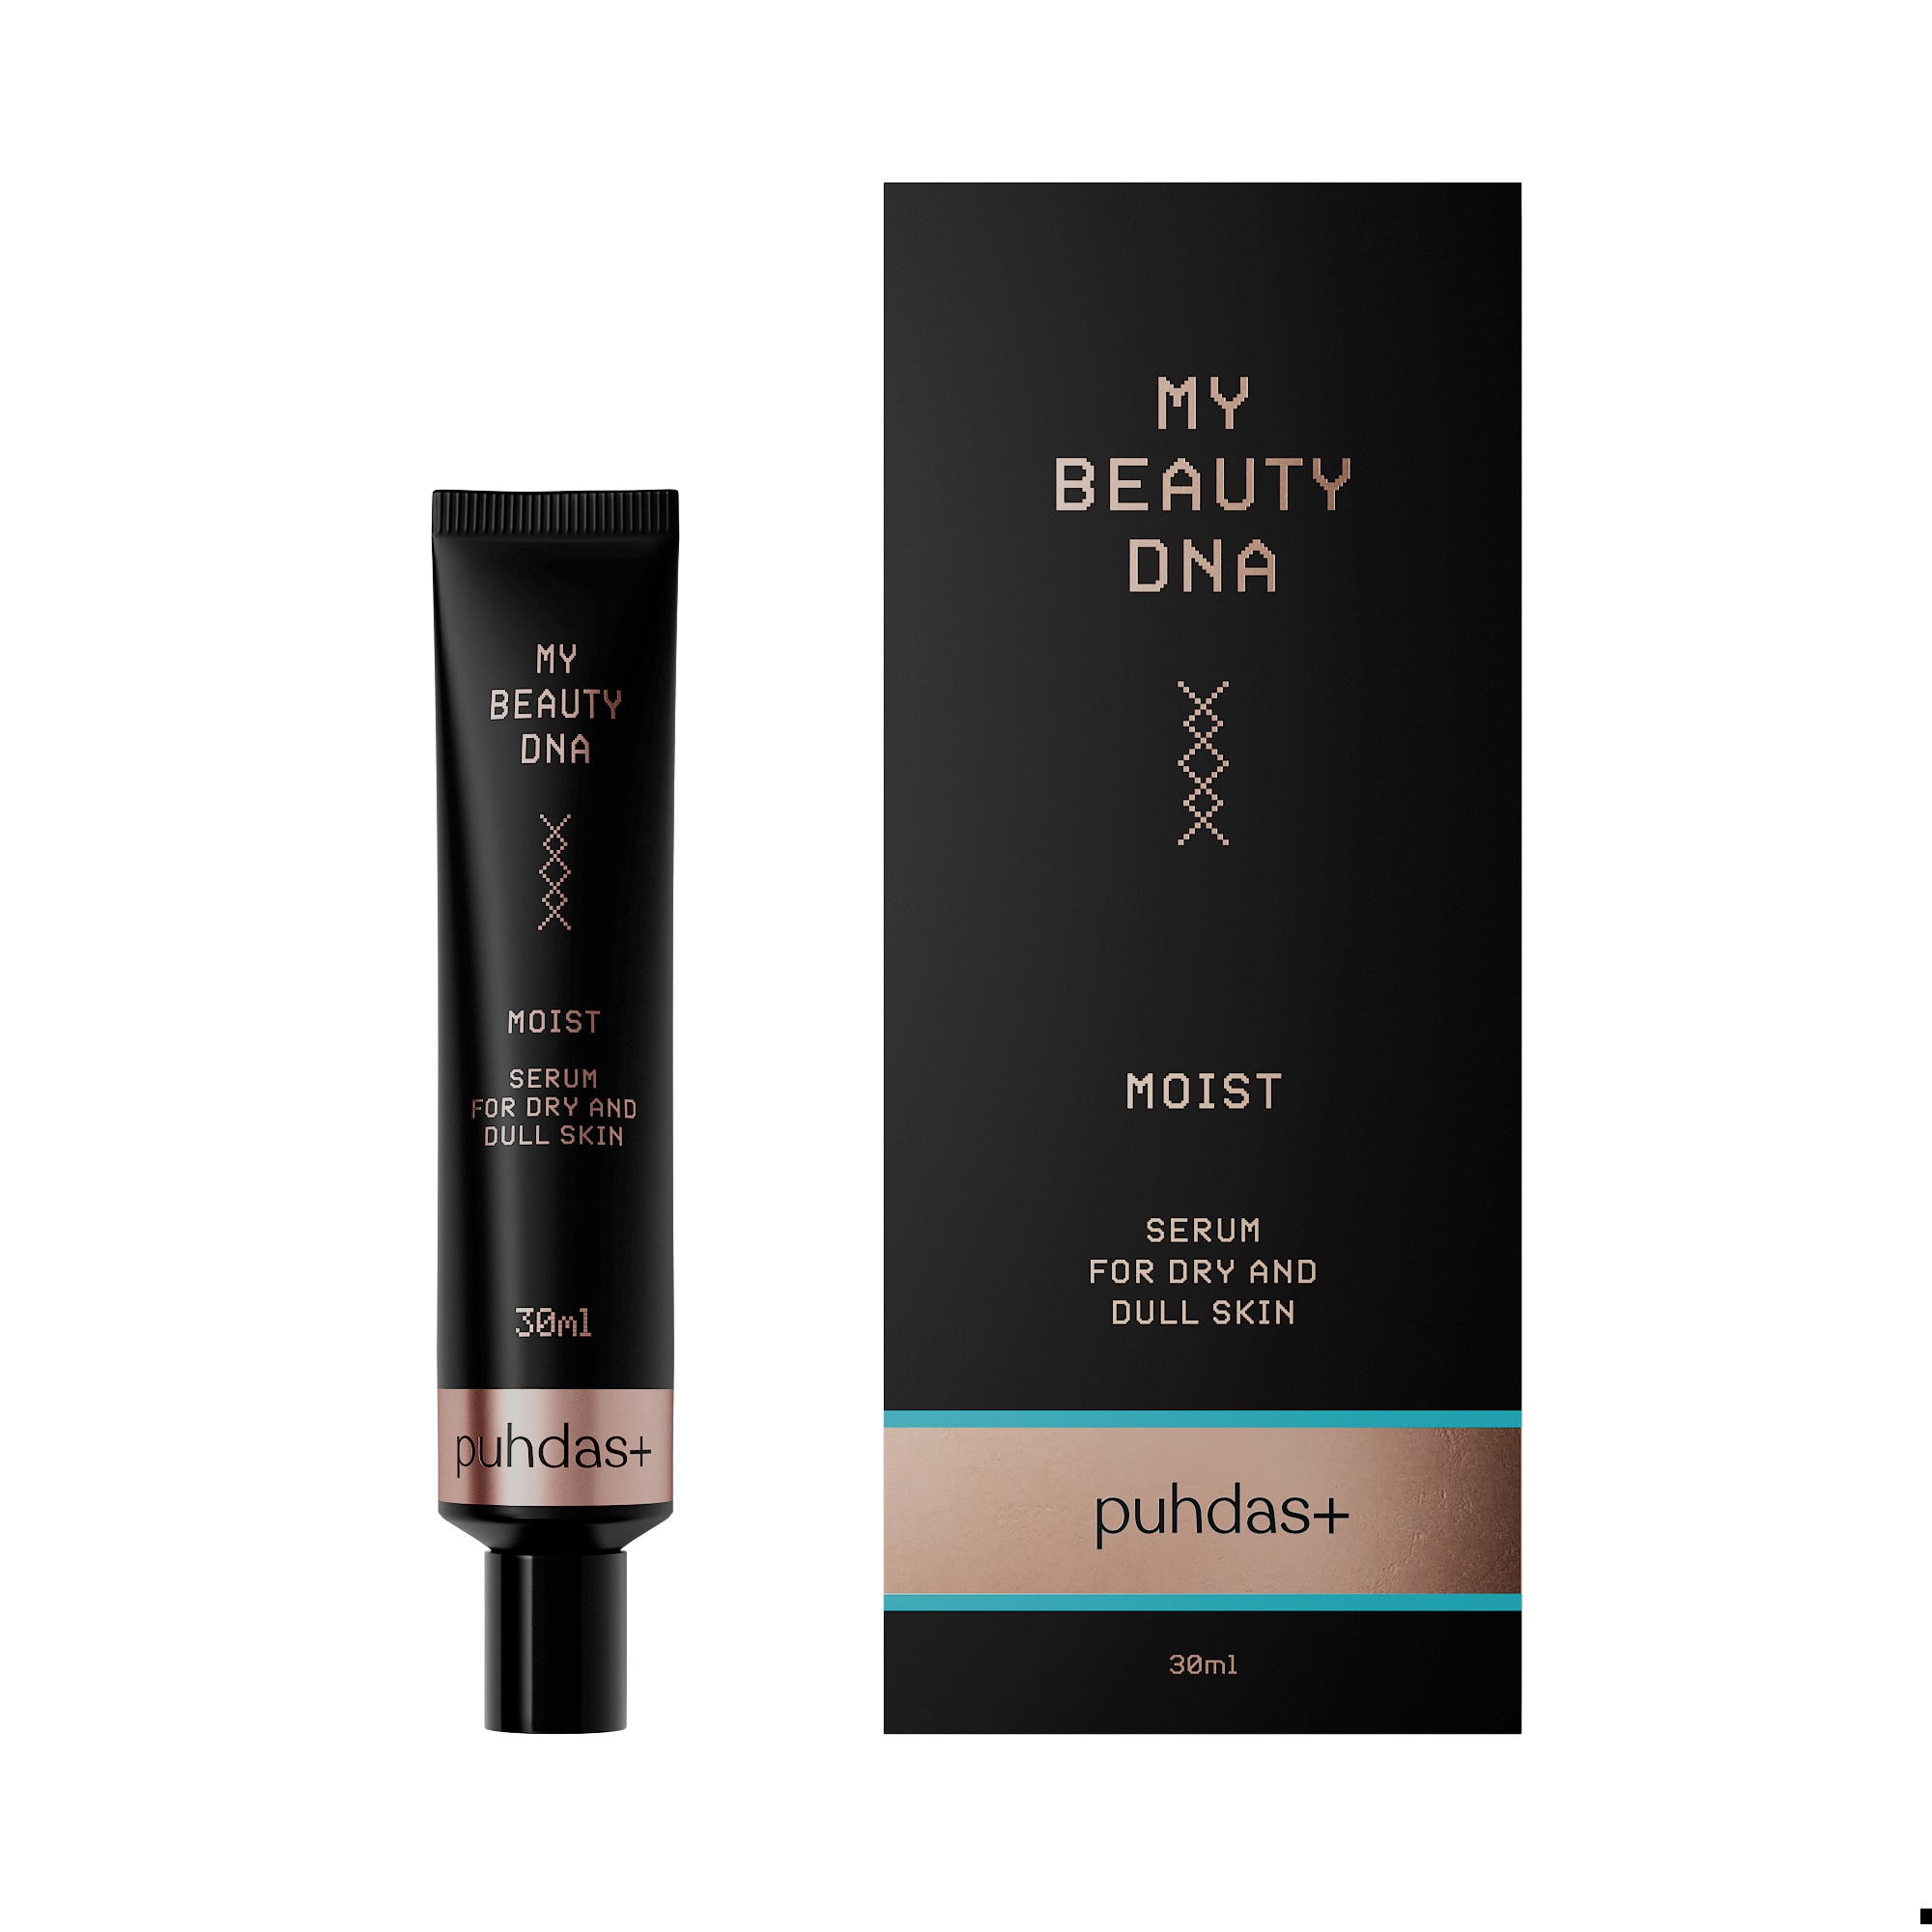 Puhdas+ Beauty DNA Moist Serum for Dry and Dull Skin